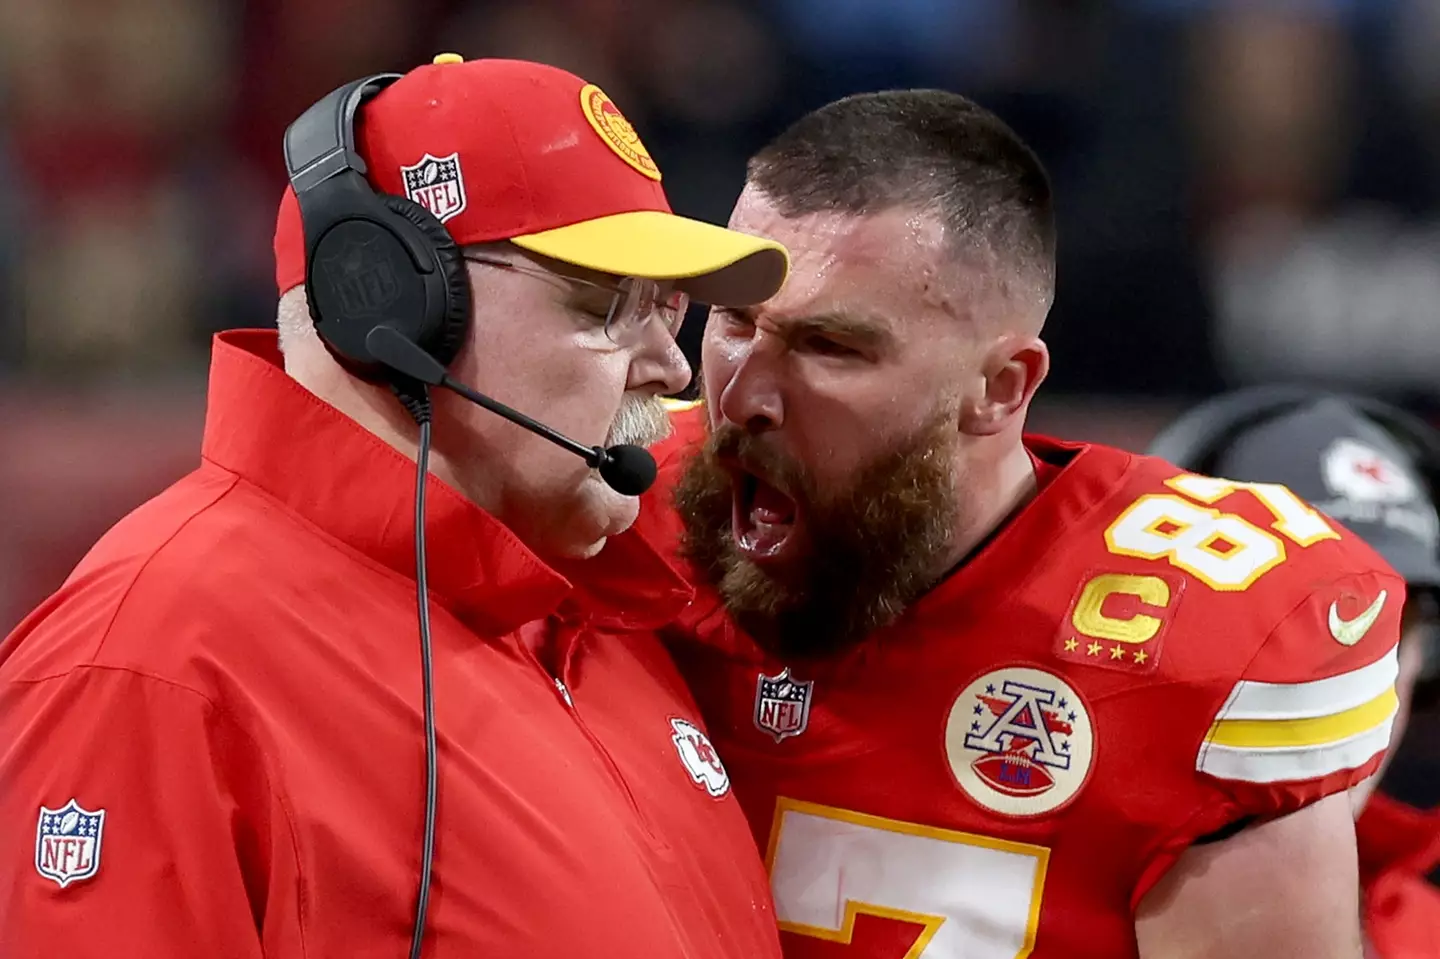 It seems as though the Kansas City Chiefs coach doesn't mind a bit of passion from his players.